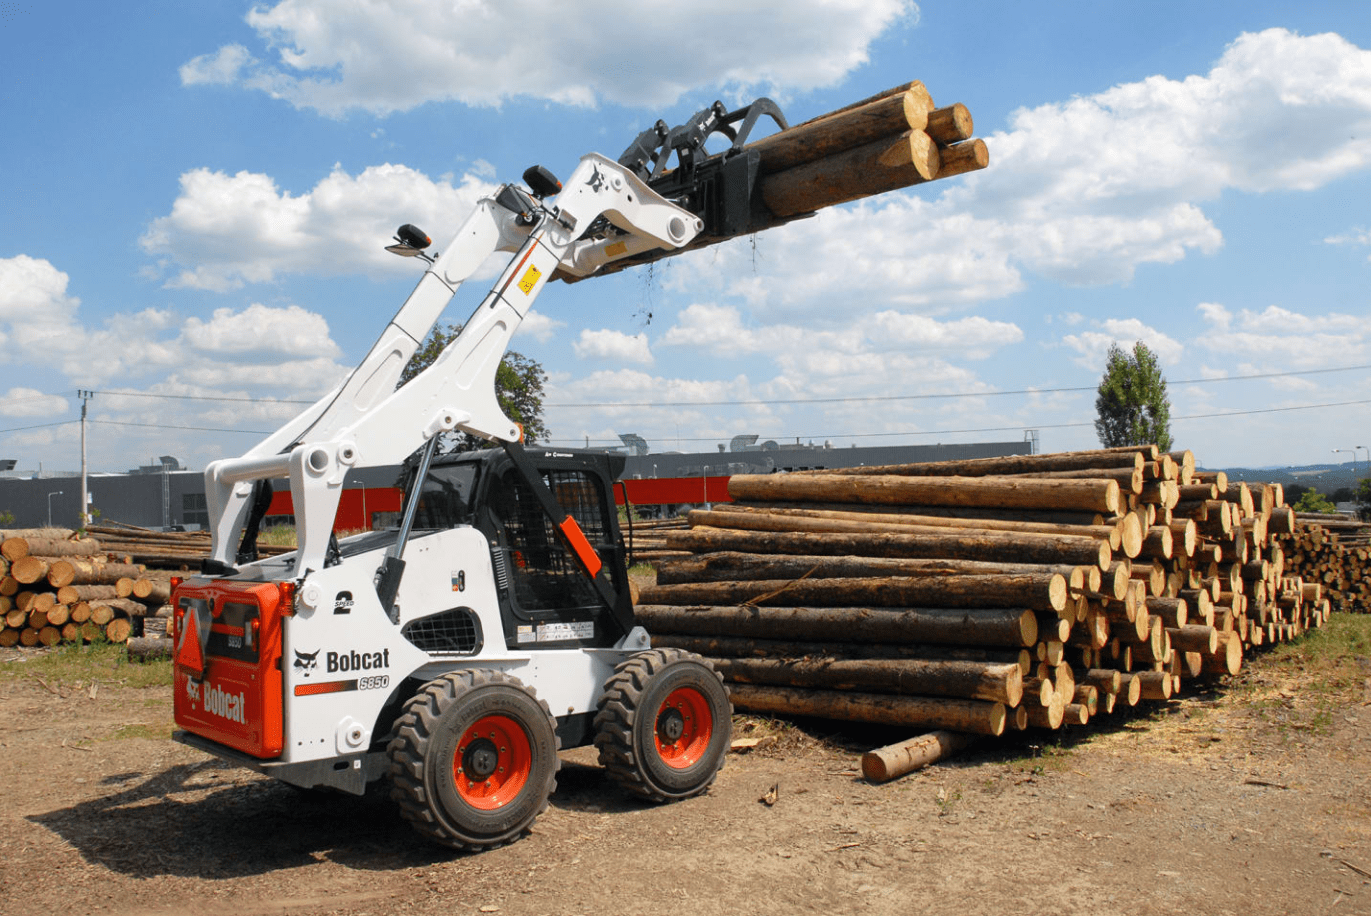 Browse Specs and more for the Bobcat S850 Skid-Steer Loader - Bobcat of Indy